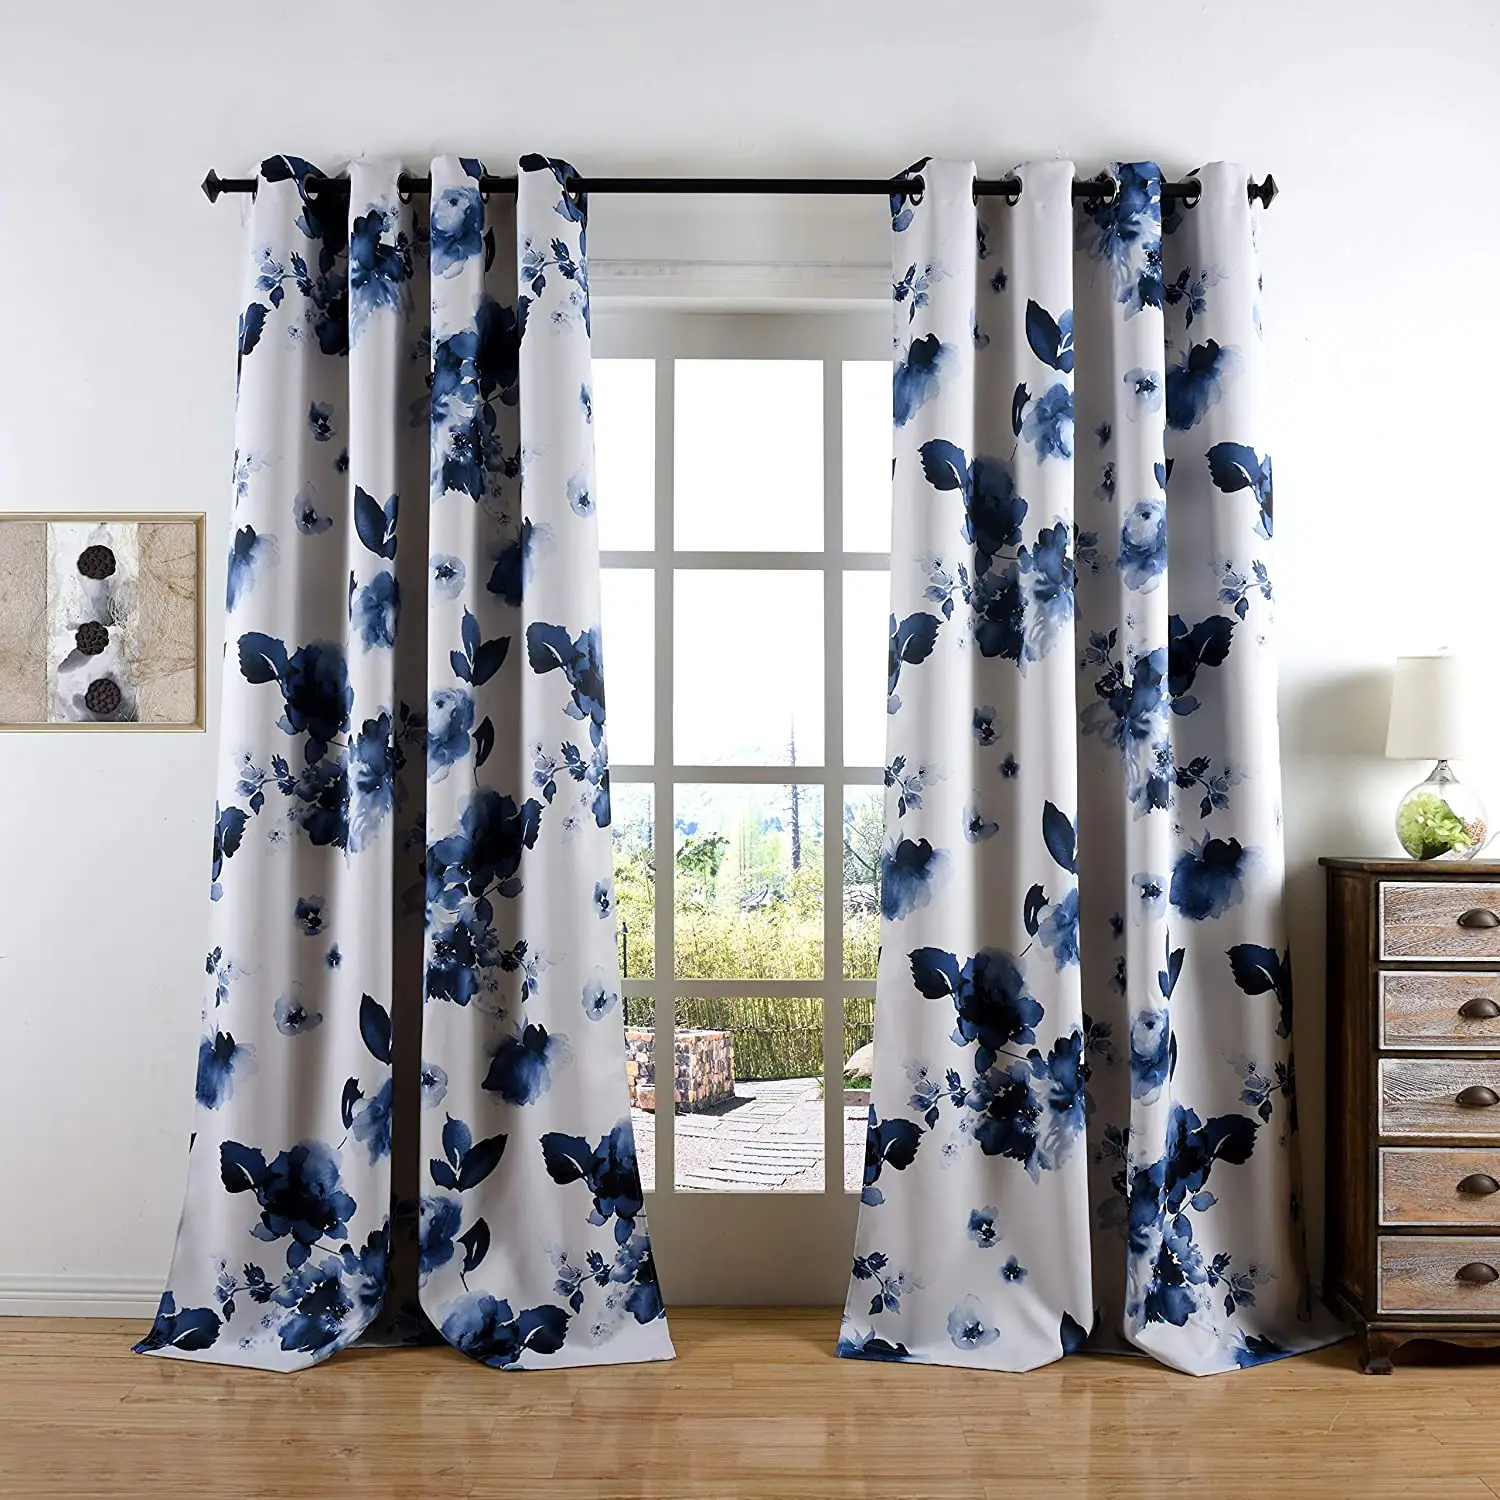 Classical leaves printed blackout curtain designs curtains living room